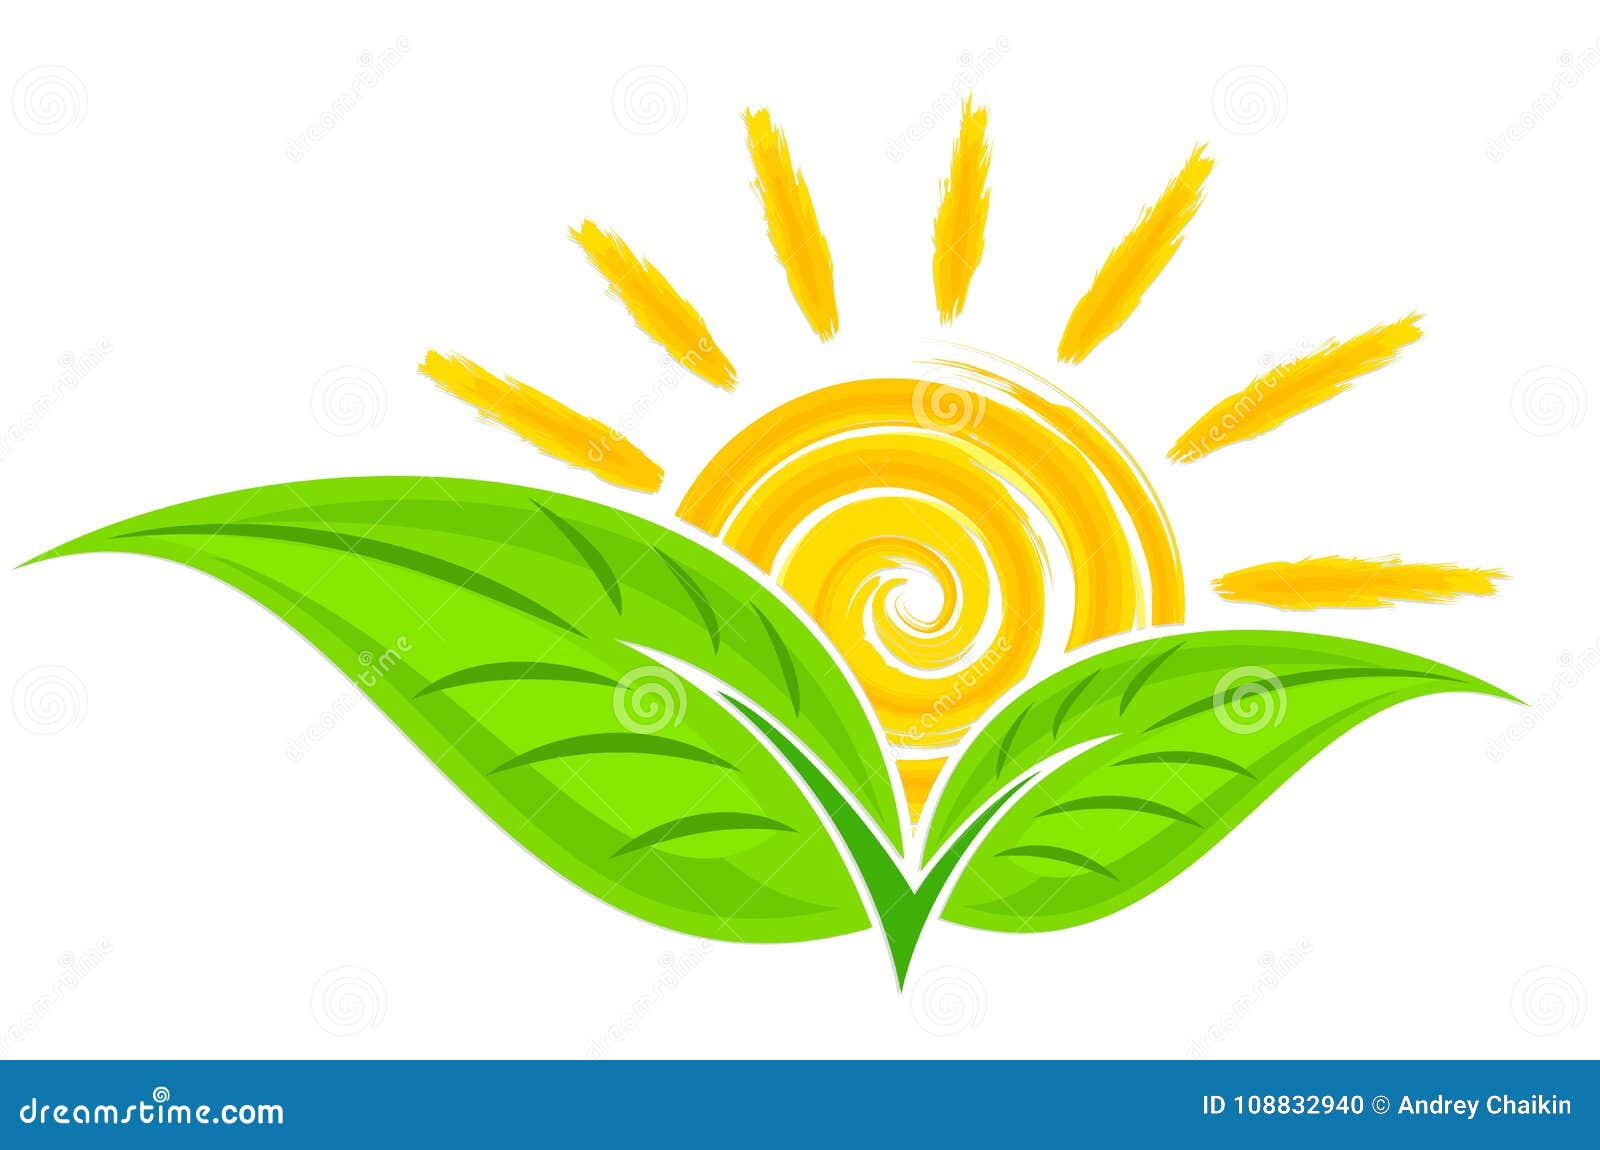 logo of green plant with sun.